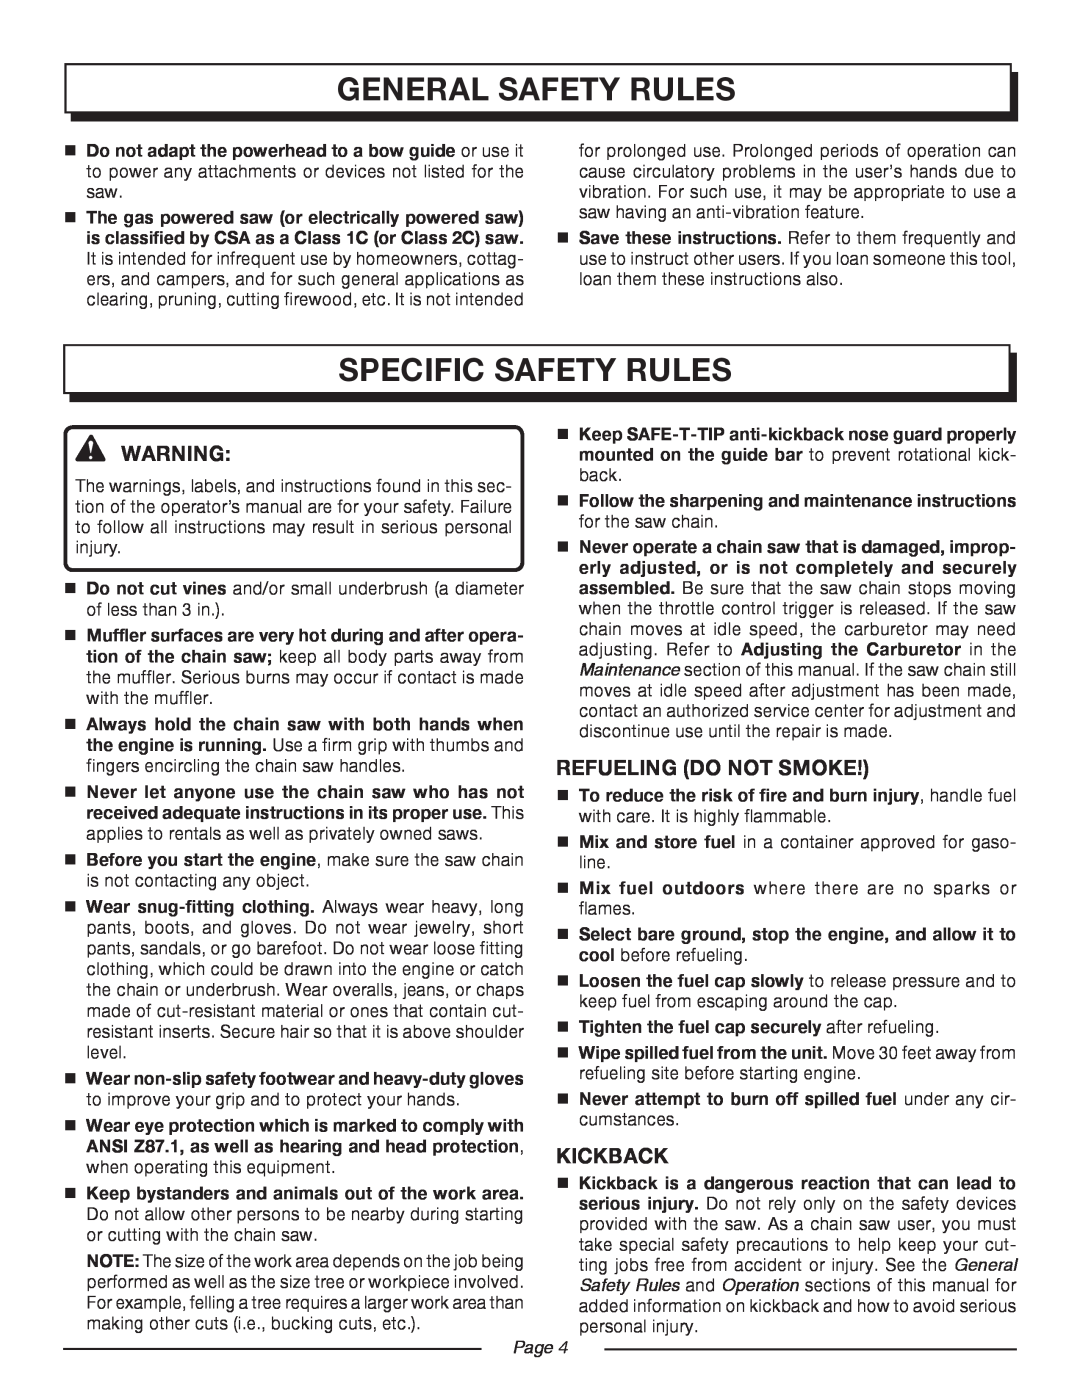 Homelite UT10552 manual specific safety rules, general safety rules, Refueling Do Not Smoke, Kickback, Page  